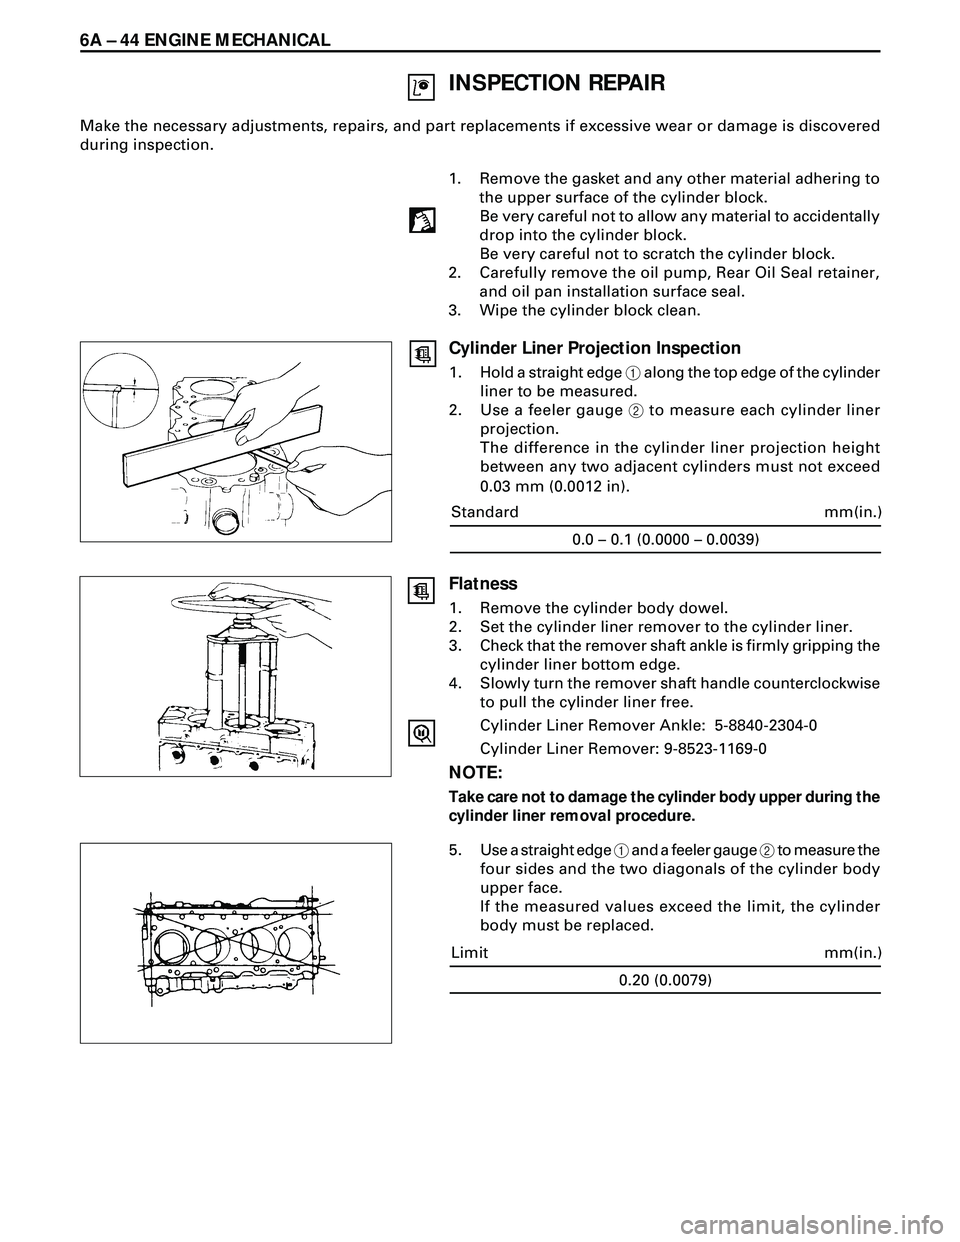 ISUZU TROOPER 1998  Service Repair Manual 6A Ð 44 ENGINE MECHANICAL
INSPECTION REPAIR
Make the necessary adjustments, repairs, and part replacements if excessive wear or damage is discovered
during inspection.
1. Remove the gasket and any ot